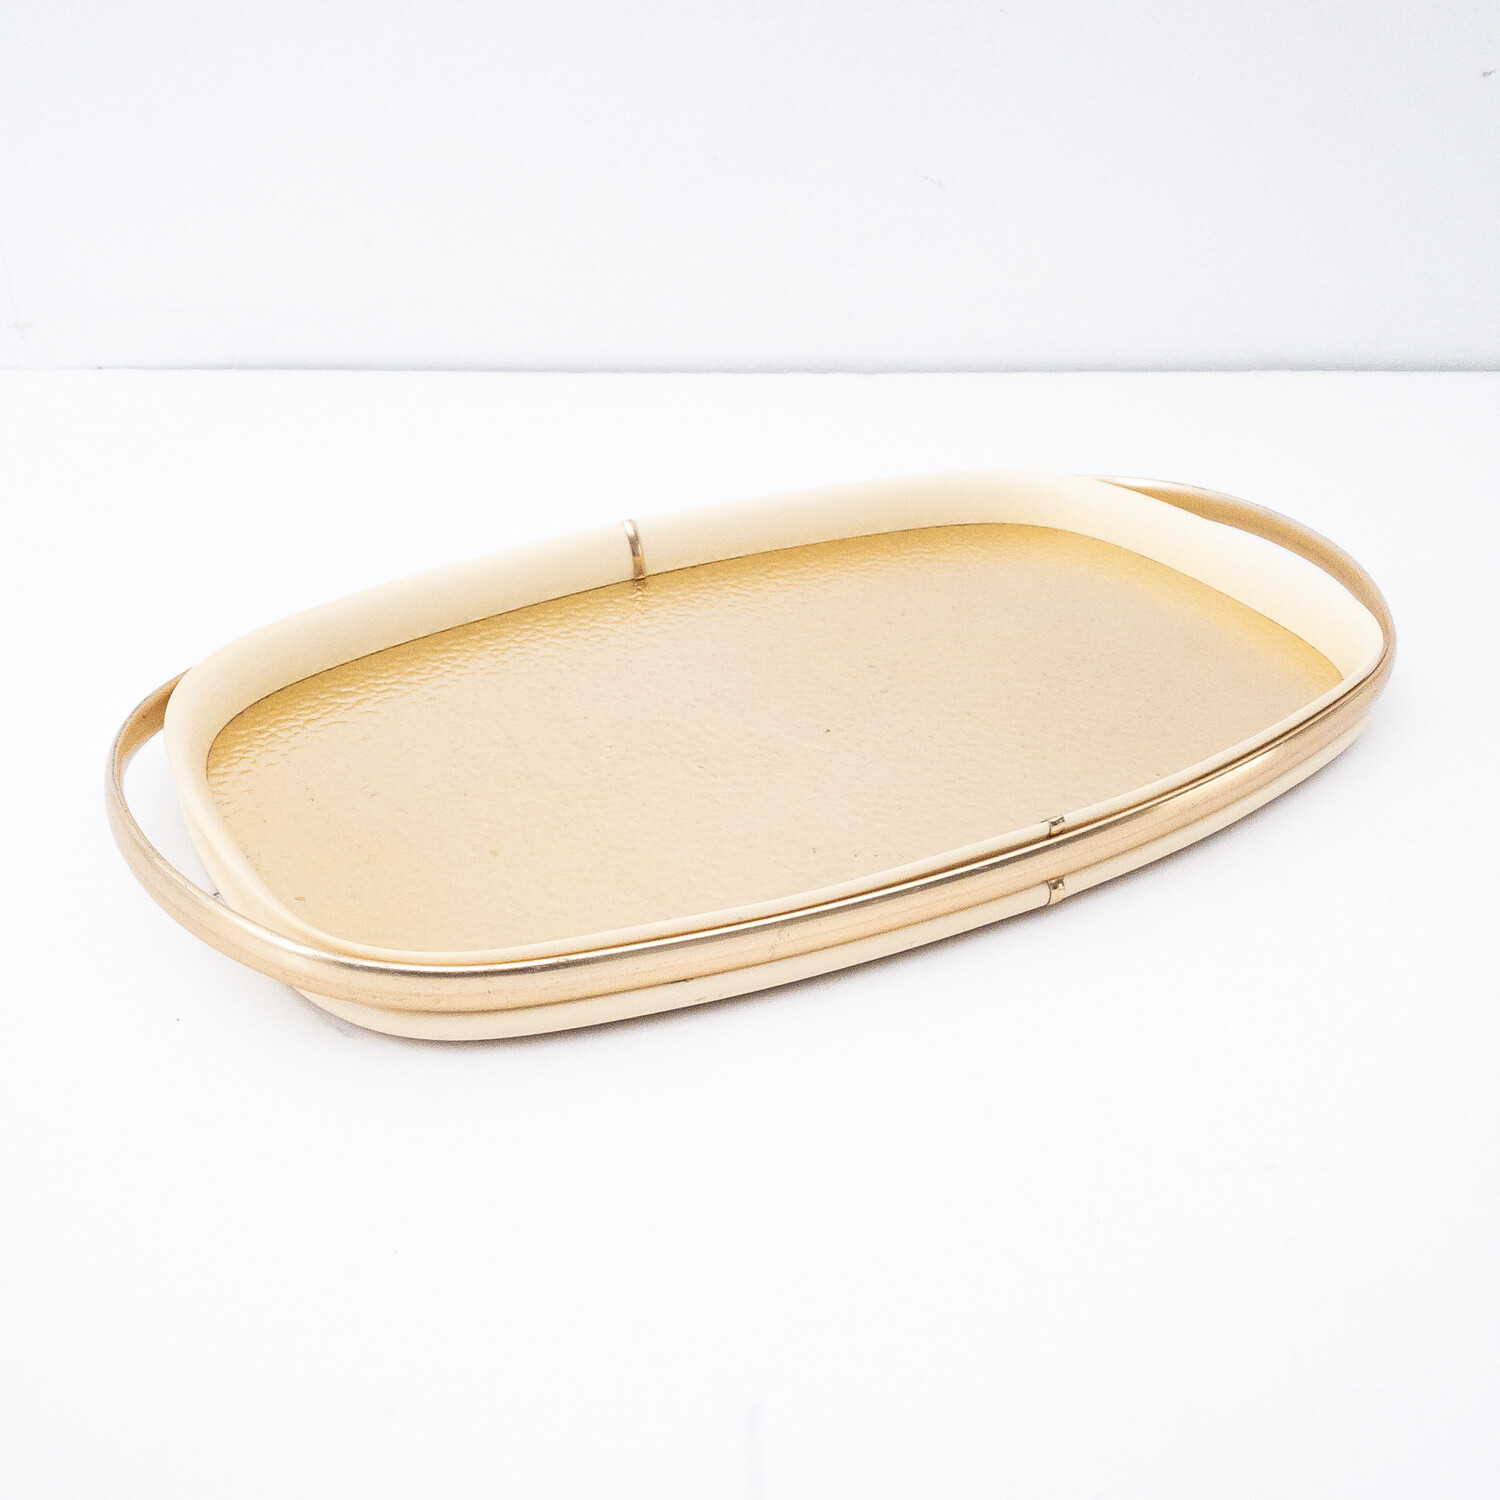 MB Mascagni style oval tray from the 1950s